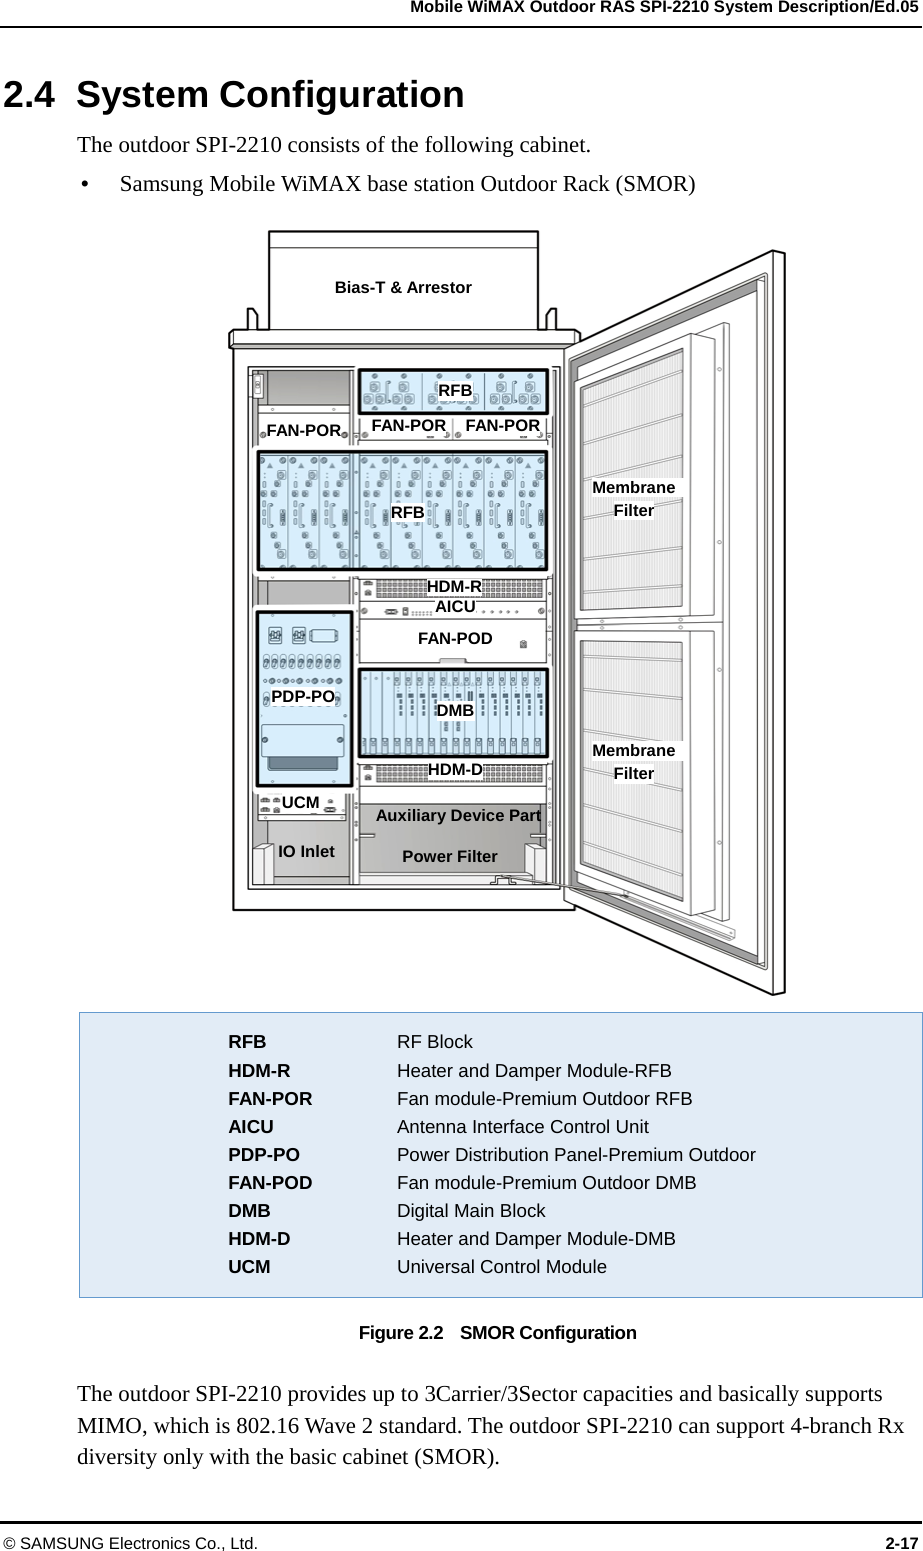   Mobile WiMAX Outdoor RAS SPI-2210 System Description/Ed.05 © SAMSUNG Electronics Co., Ltd.  2-17 2.4 System Configuration The outdoor SPI-2210 consists of the following cabinet.  Samsung Mobile WiMAX base station Outdoor Rack (SMOR)   RFB  RF Block  HDM-R Heater and Damper Module-RFB  FAN-POR Fan module-Premium Outdoor RFB  AICU Antenna Interface Control Unit  PDP-PO Power Distribution Panel-Premium Outdoor  FAN-POD Fan module-Premium Outdoor DMB  DMB  Digital Main Block  HDM-D Heater and Damper Module-DMB  UCM  Universal Control Module Figure 2.2    SMOR Configuration  The outdoor SPI-2210 provides up to 3Carrier/3Sector capacities and basically supports MIMO, which is 802.16 Wave 2 standard. The outdoor SPI-2210 can support 4-branch Rx diversity only with the basic cabinet (SMOR). Bias-T &amp; Arrestor RFBRFB FAN-POR  FAN-POR  FAN-POR HDM-RDMB AICUFAN-PODUCM PDP-PO Auxiliary Device Part Power Filter Membrane  Filter HDM-D Membrane  Filter IO Inlet 